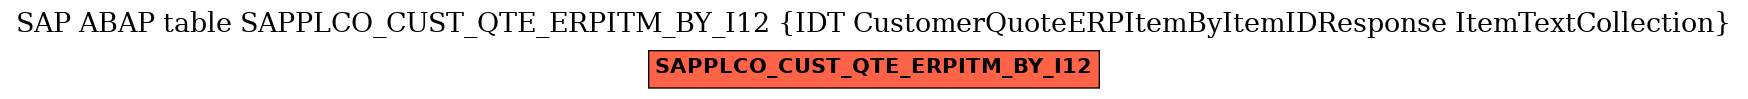 E-R Diagram for table SAPPLCO_CUST_QTE_ERPITM_BY_I12 (IDT CustomerQuoteERPItemByItemIDResponse ItemTextCollection)